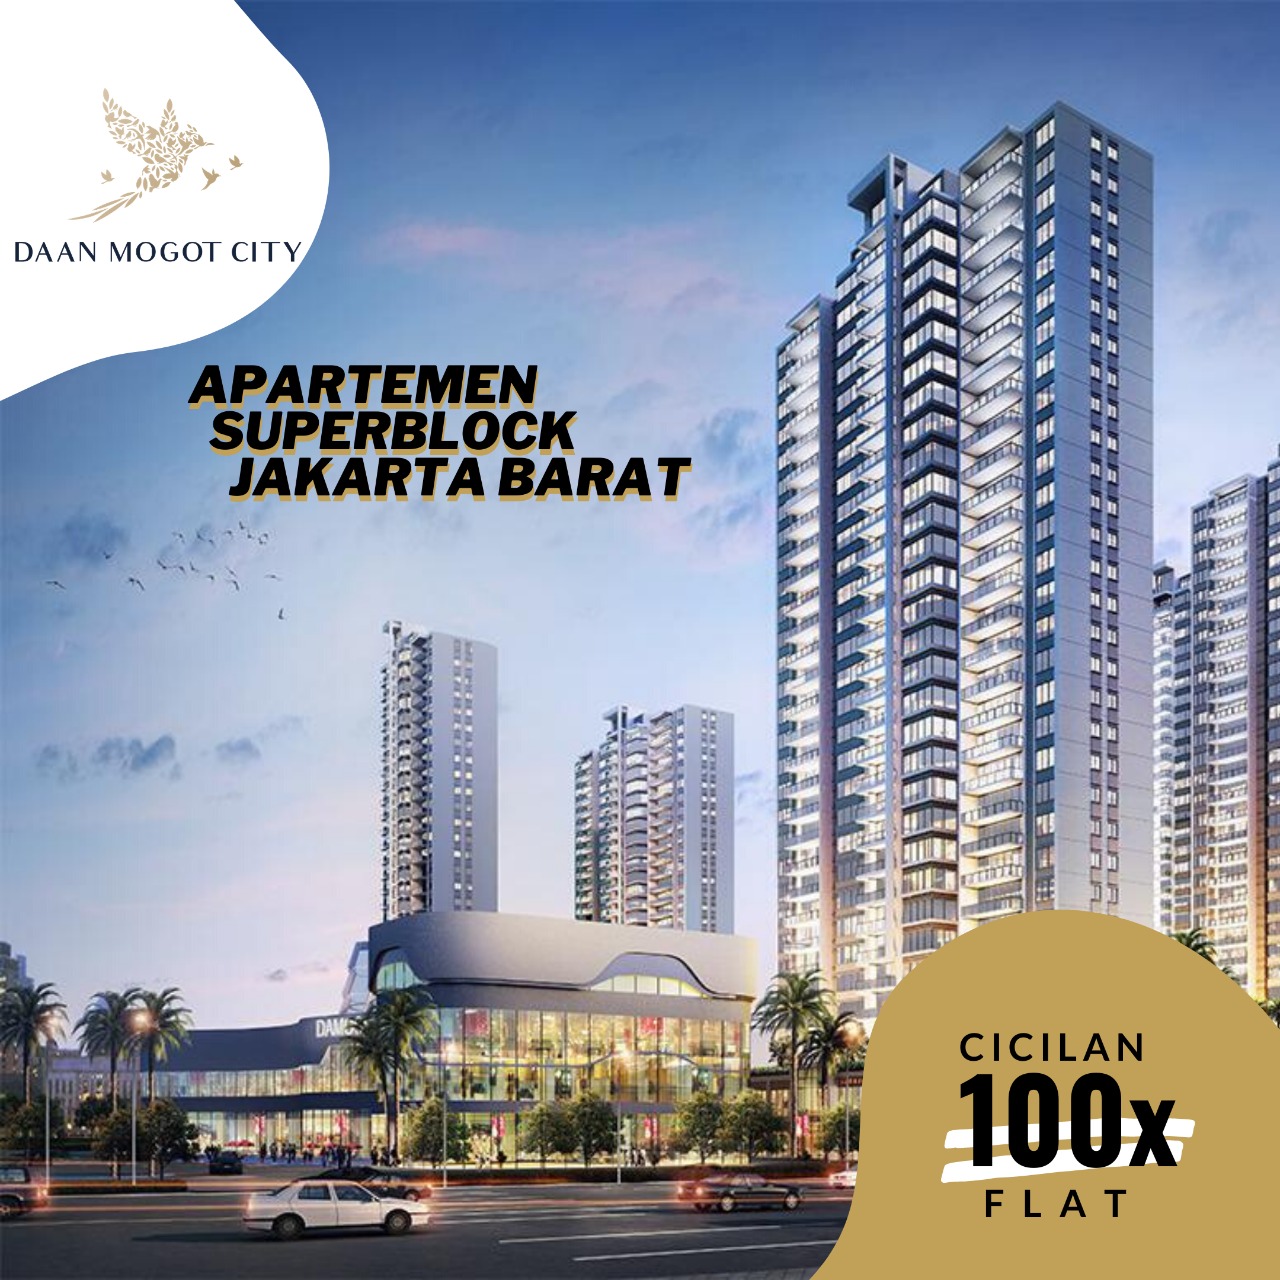 DAAN MOGOT CITY – Moment for property